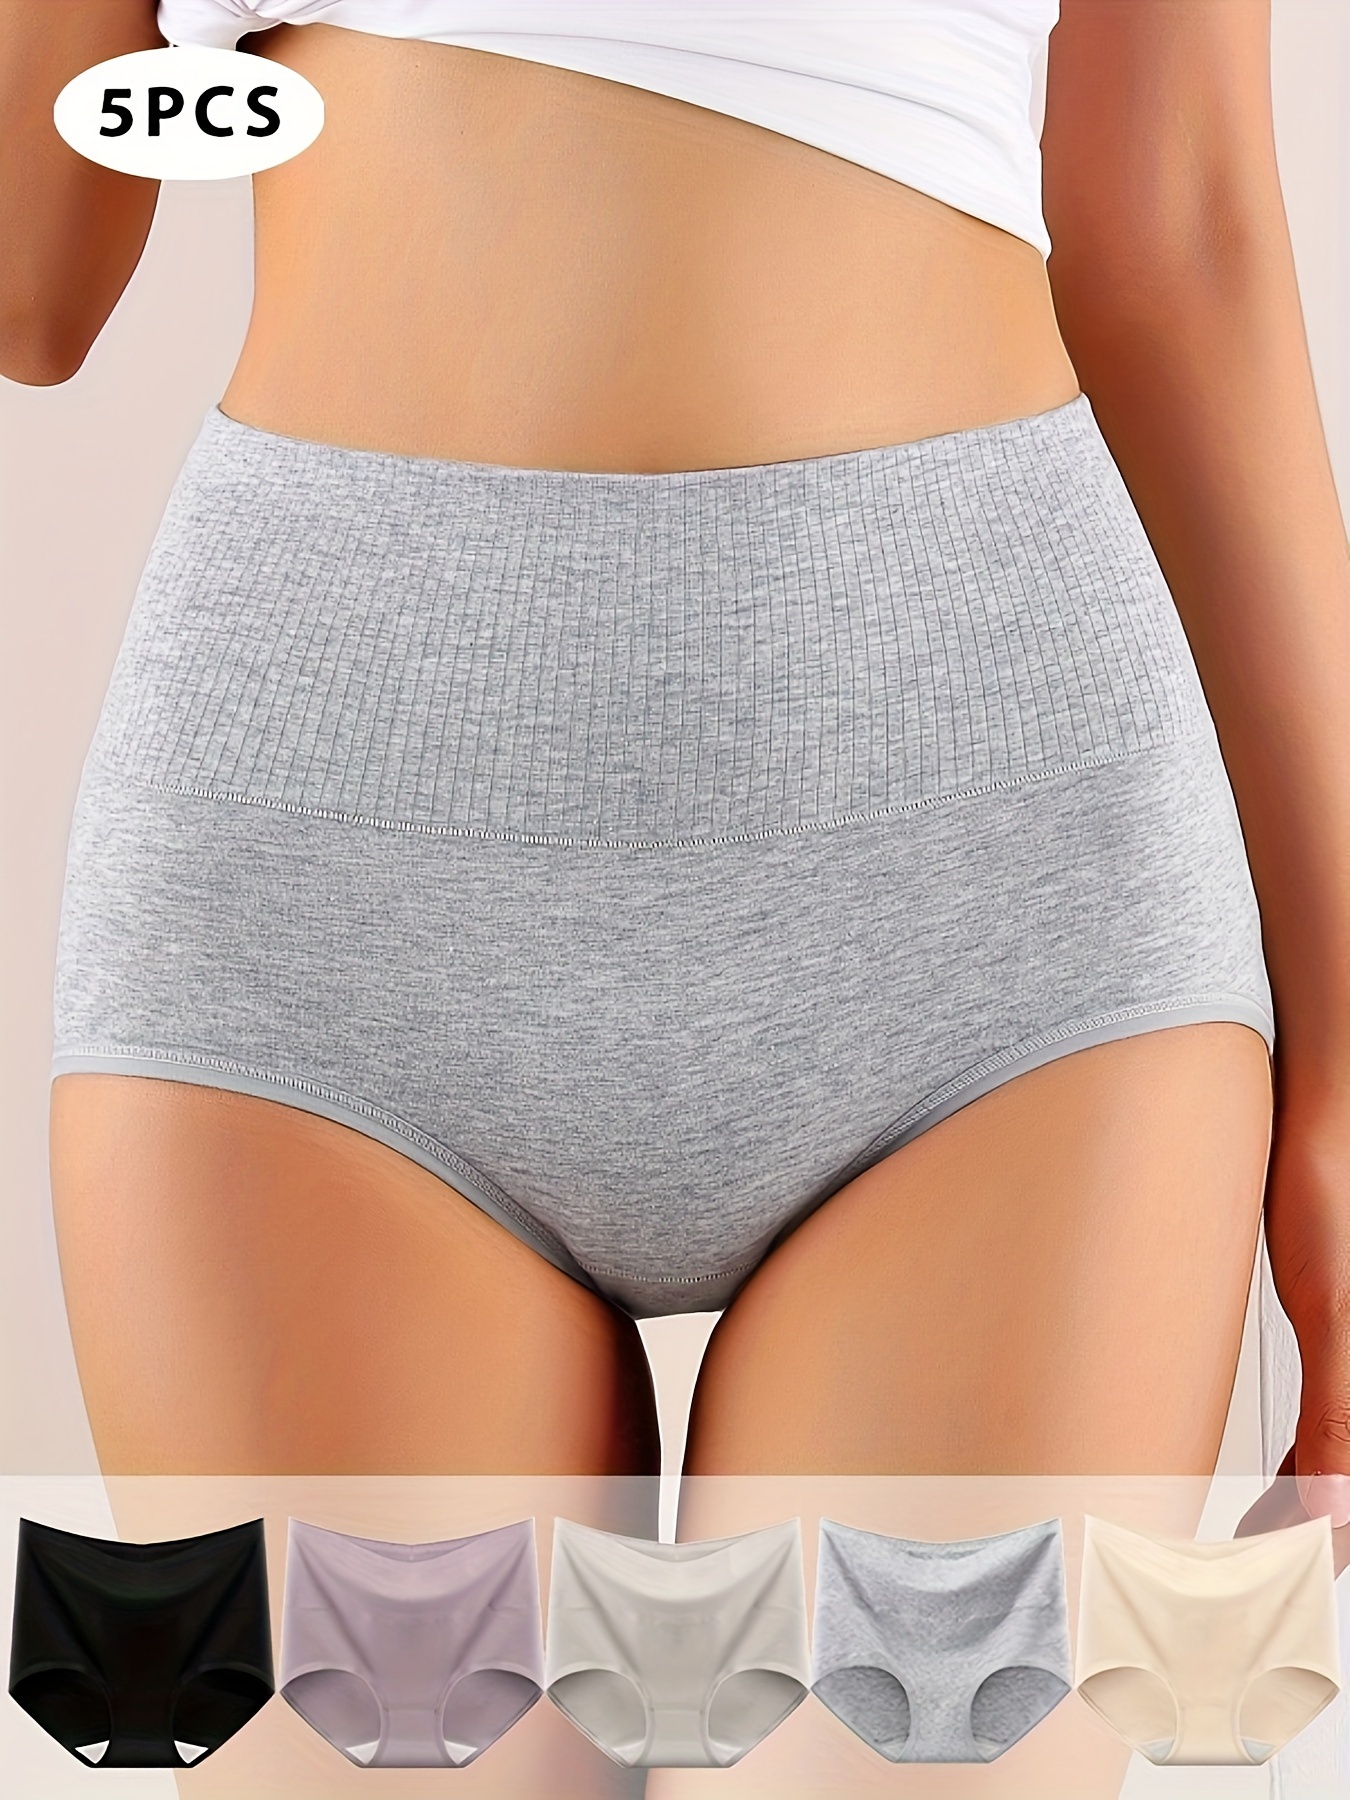 HBMIANICE Women's Cotton Underwear Stretch Panties Soft Breathable